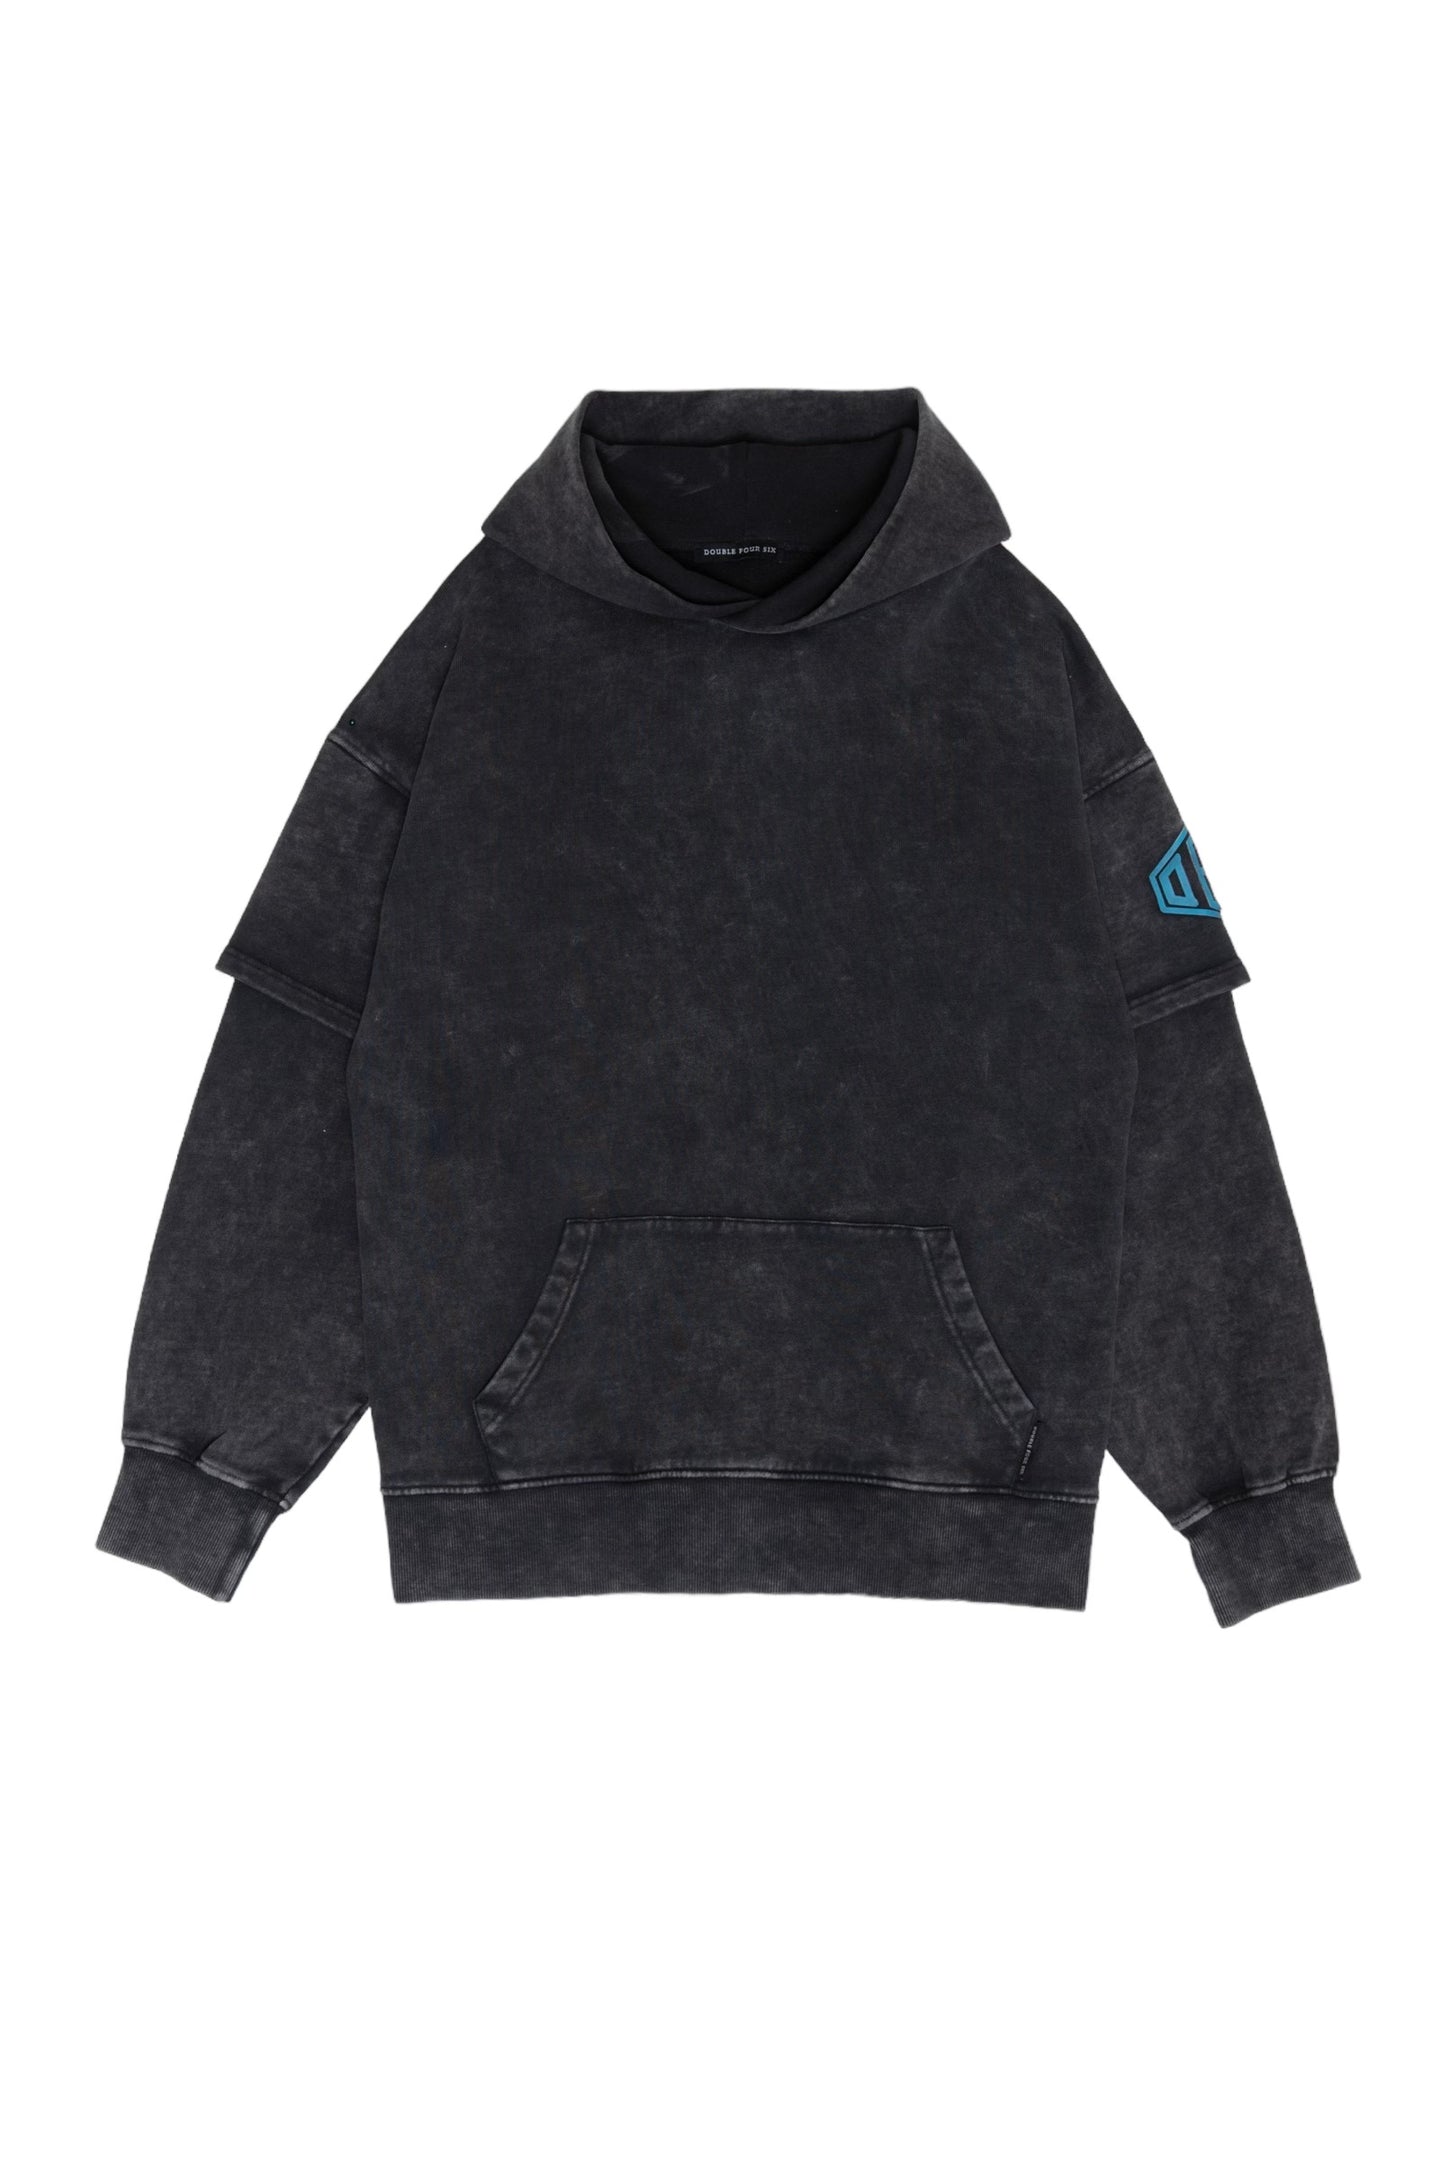 DFS-Silicon Logo  Layered Sleeve Hoodie Black